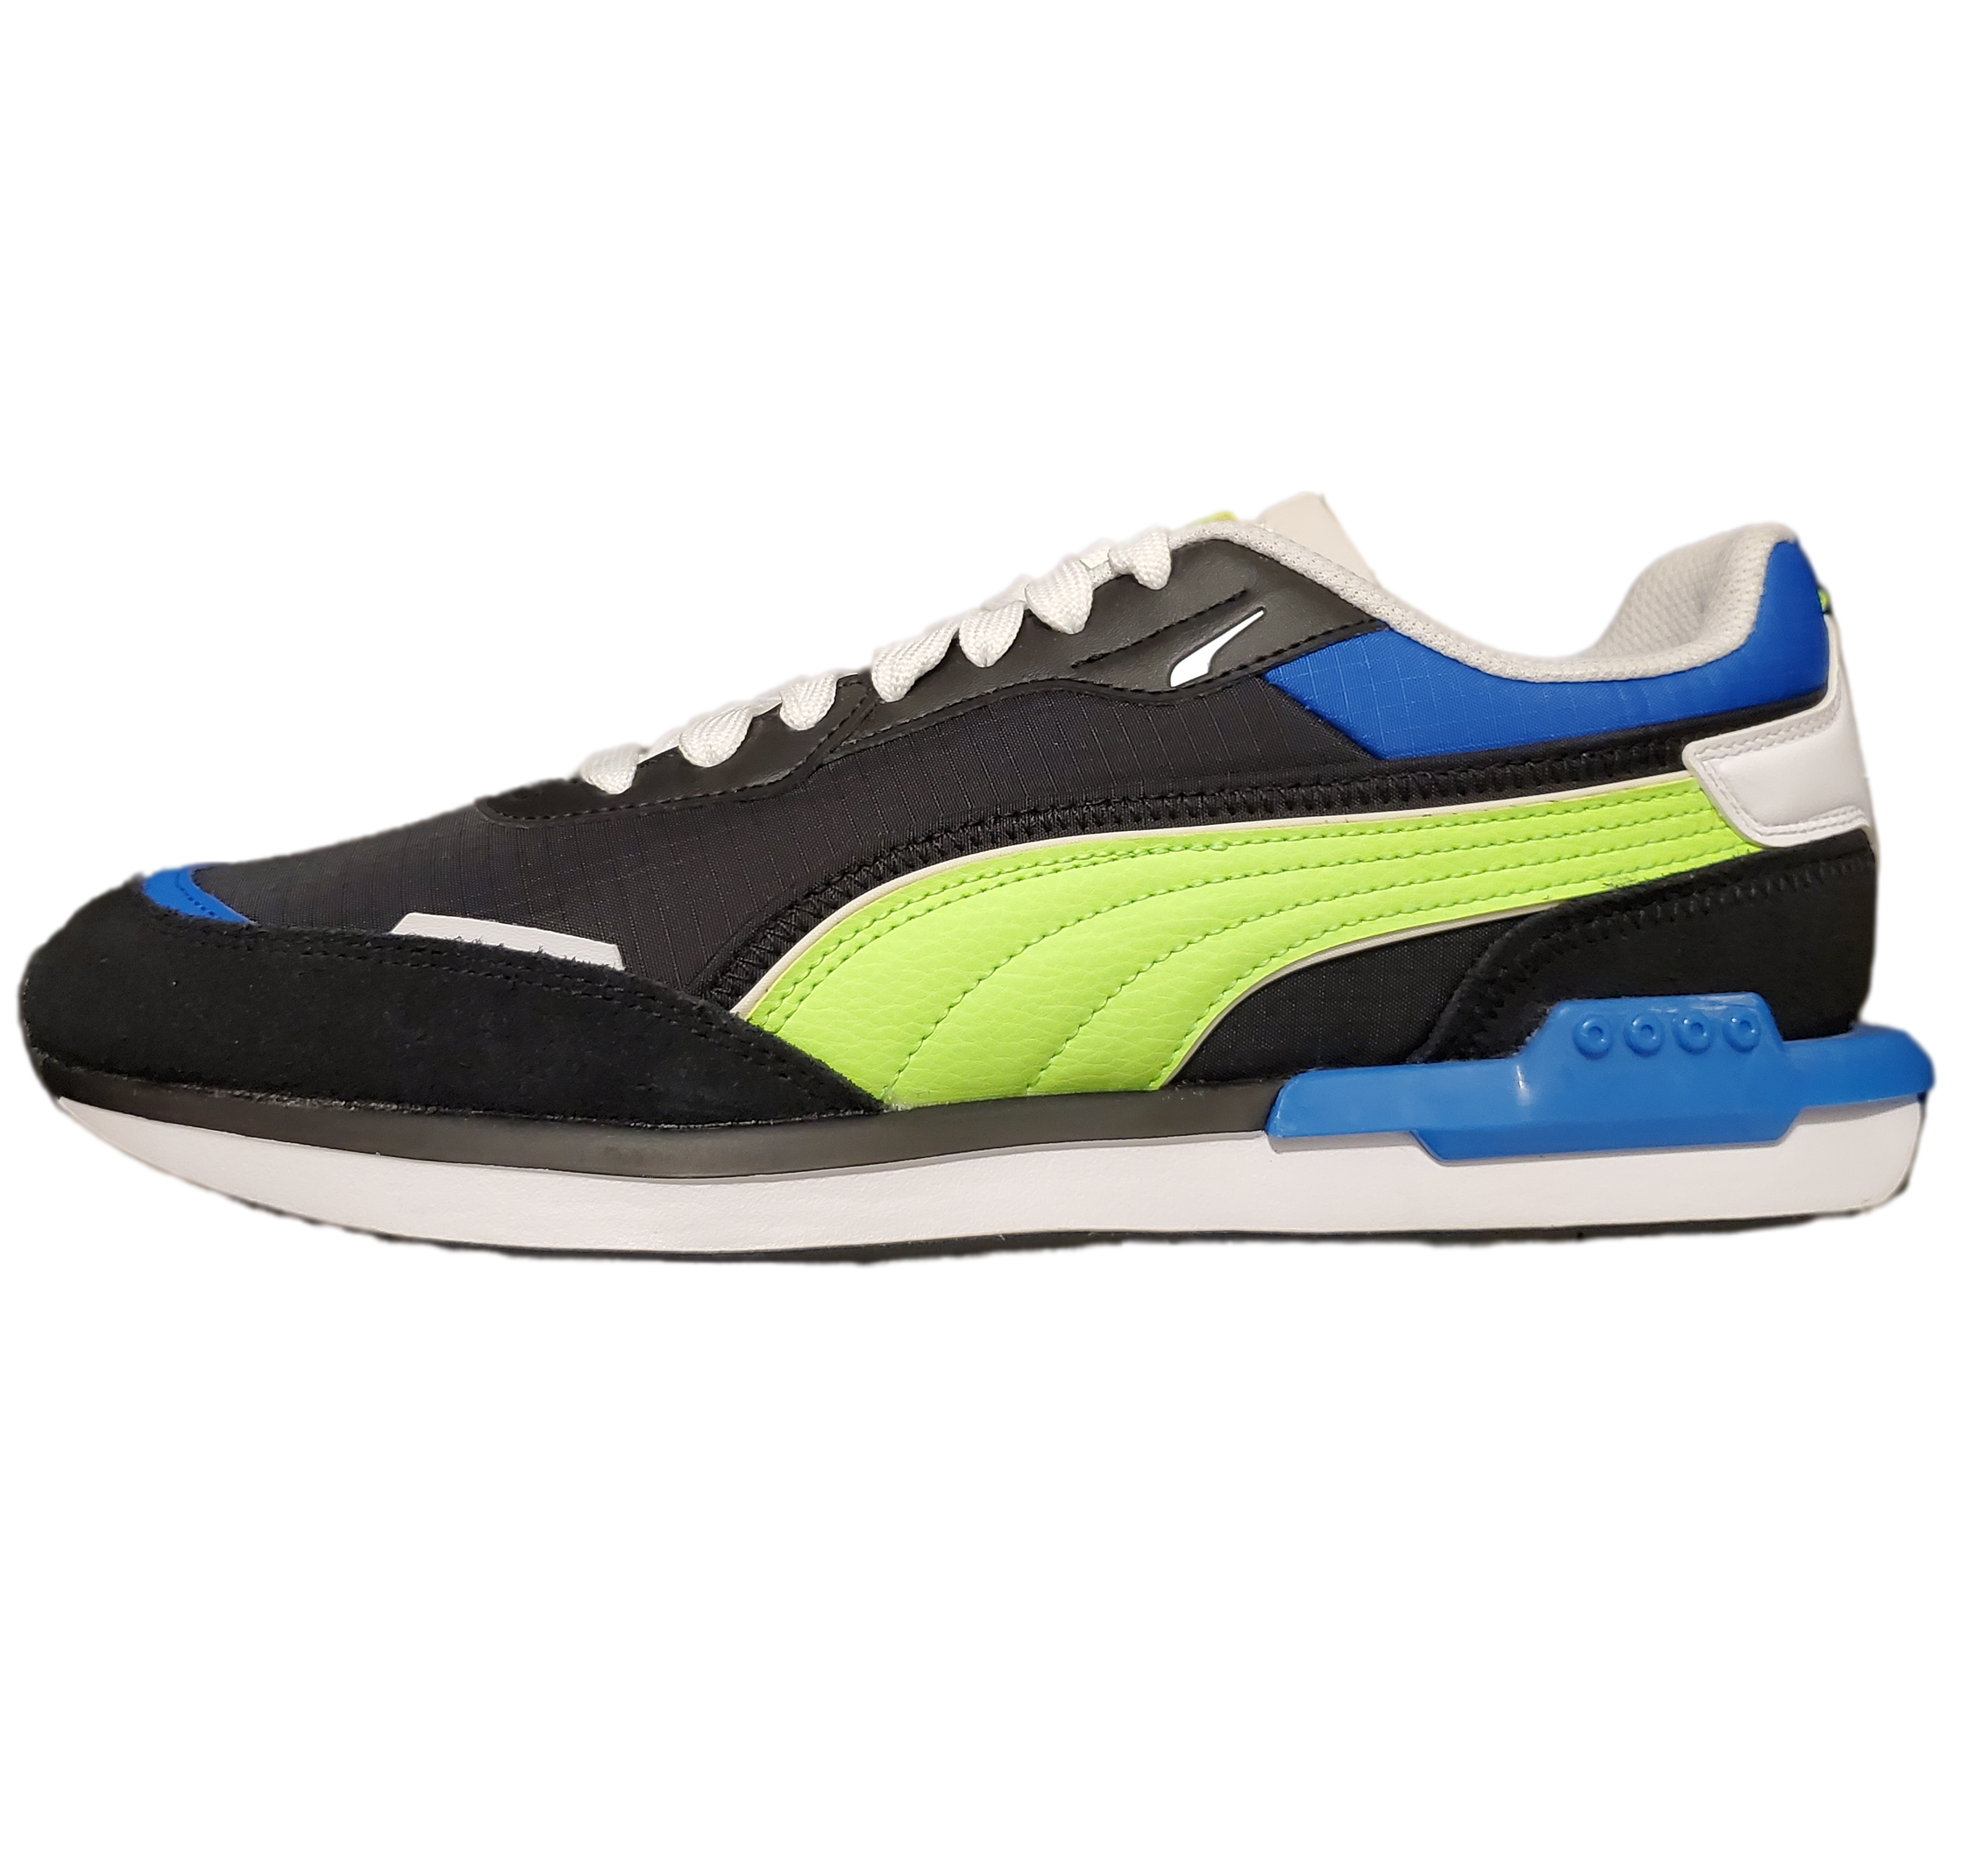 Puma City Rider Black Green Blue Mens Size 11 Sneaker Athletic Shoes ...